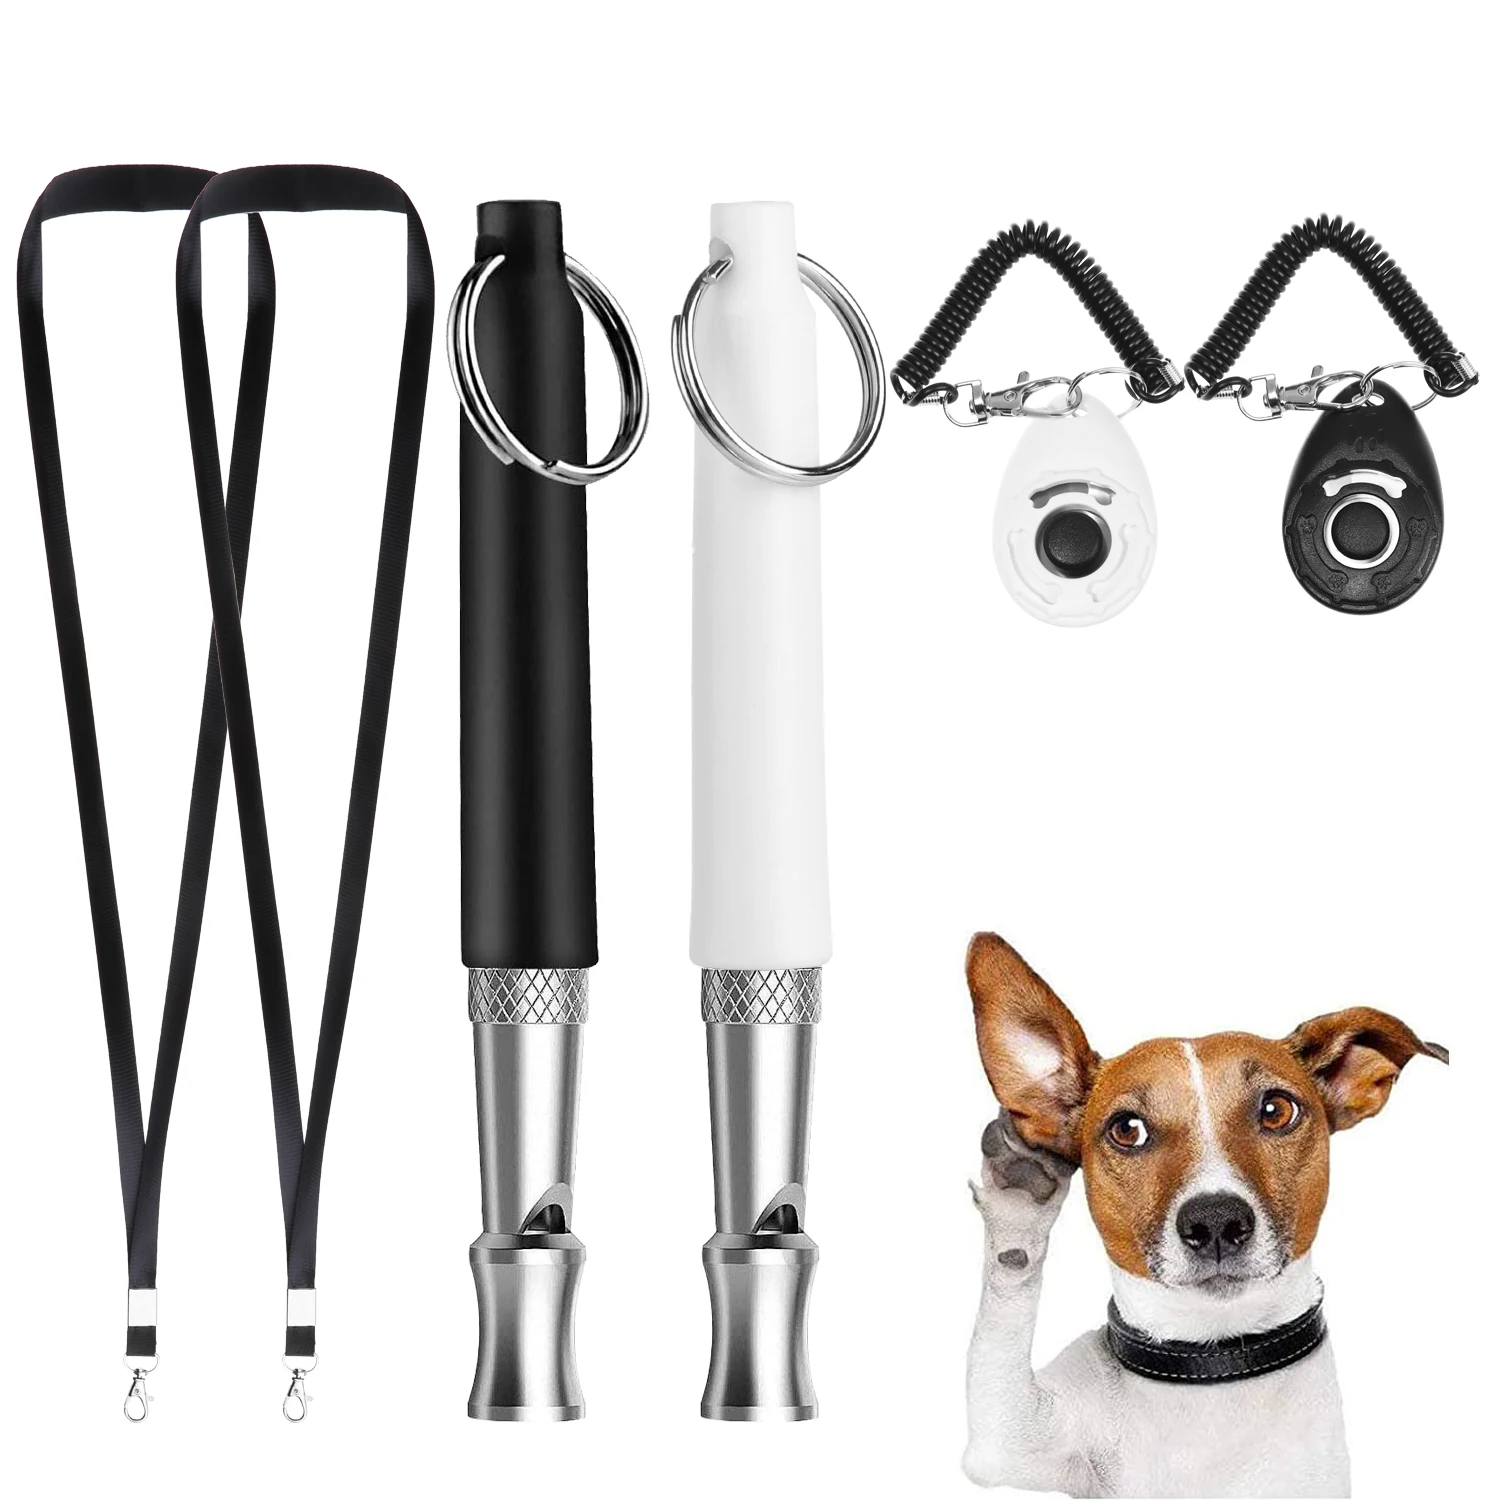 

Silent Ultrasonic Dog Whistle Kit Stop Barking Adjustable Pitch Dog Training Whistle with Lanyard Strap and Clicker Pet Supplies